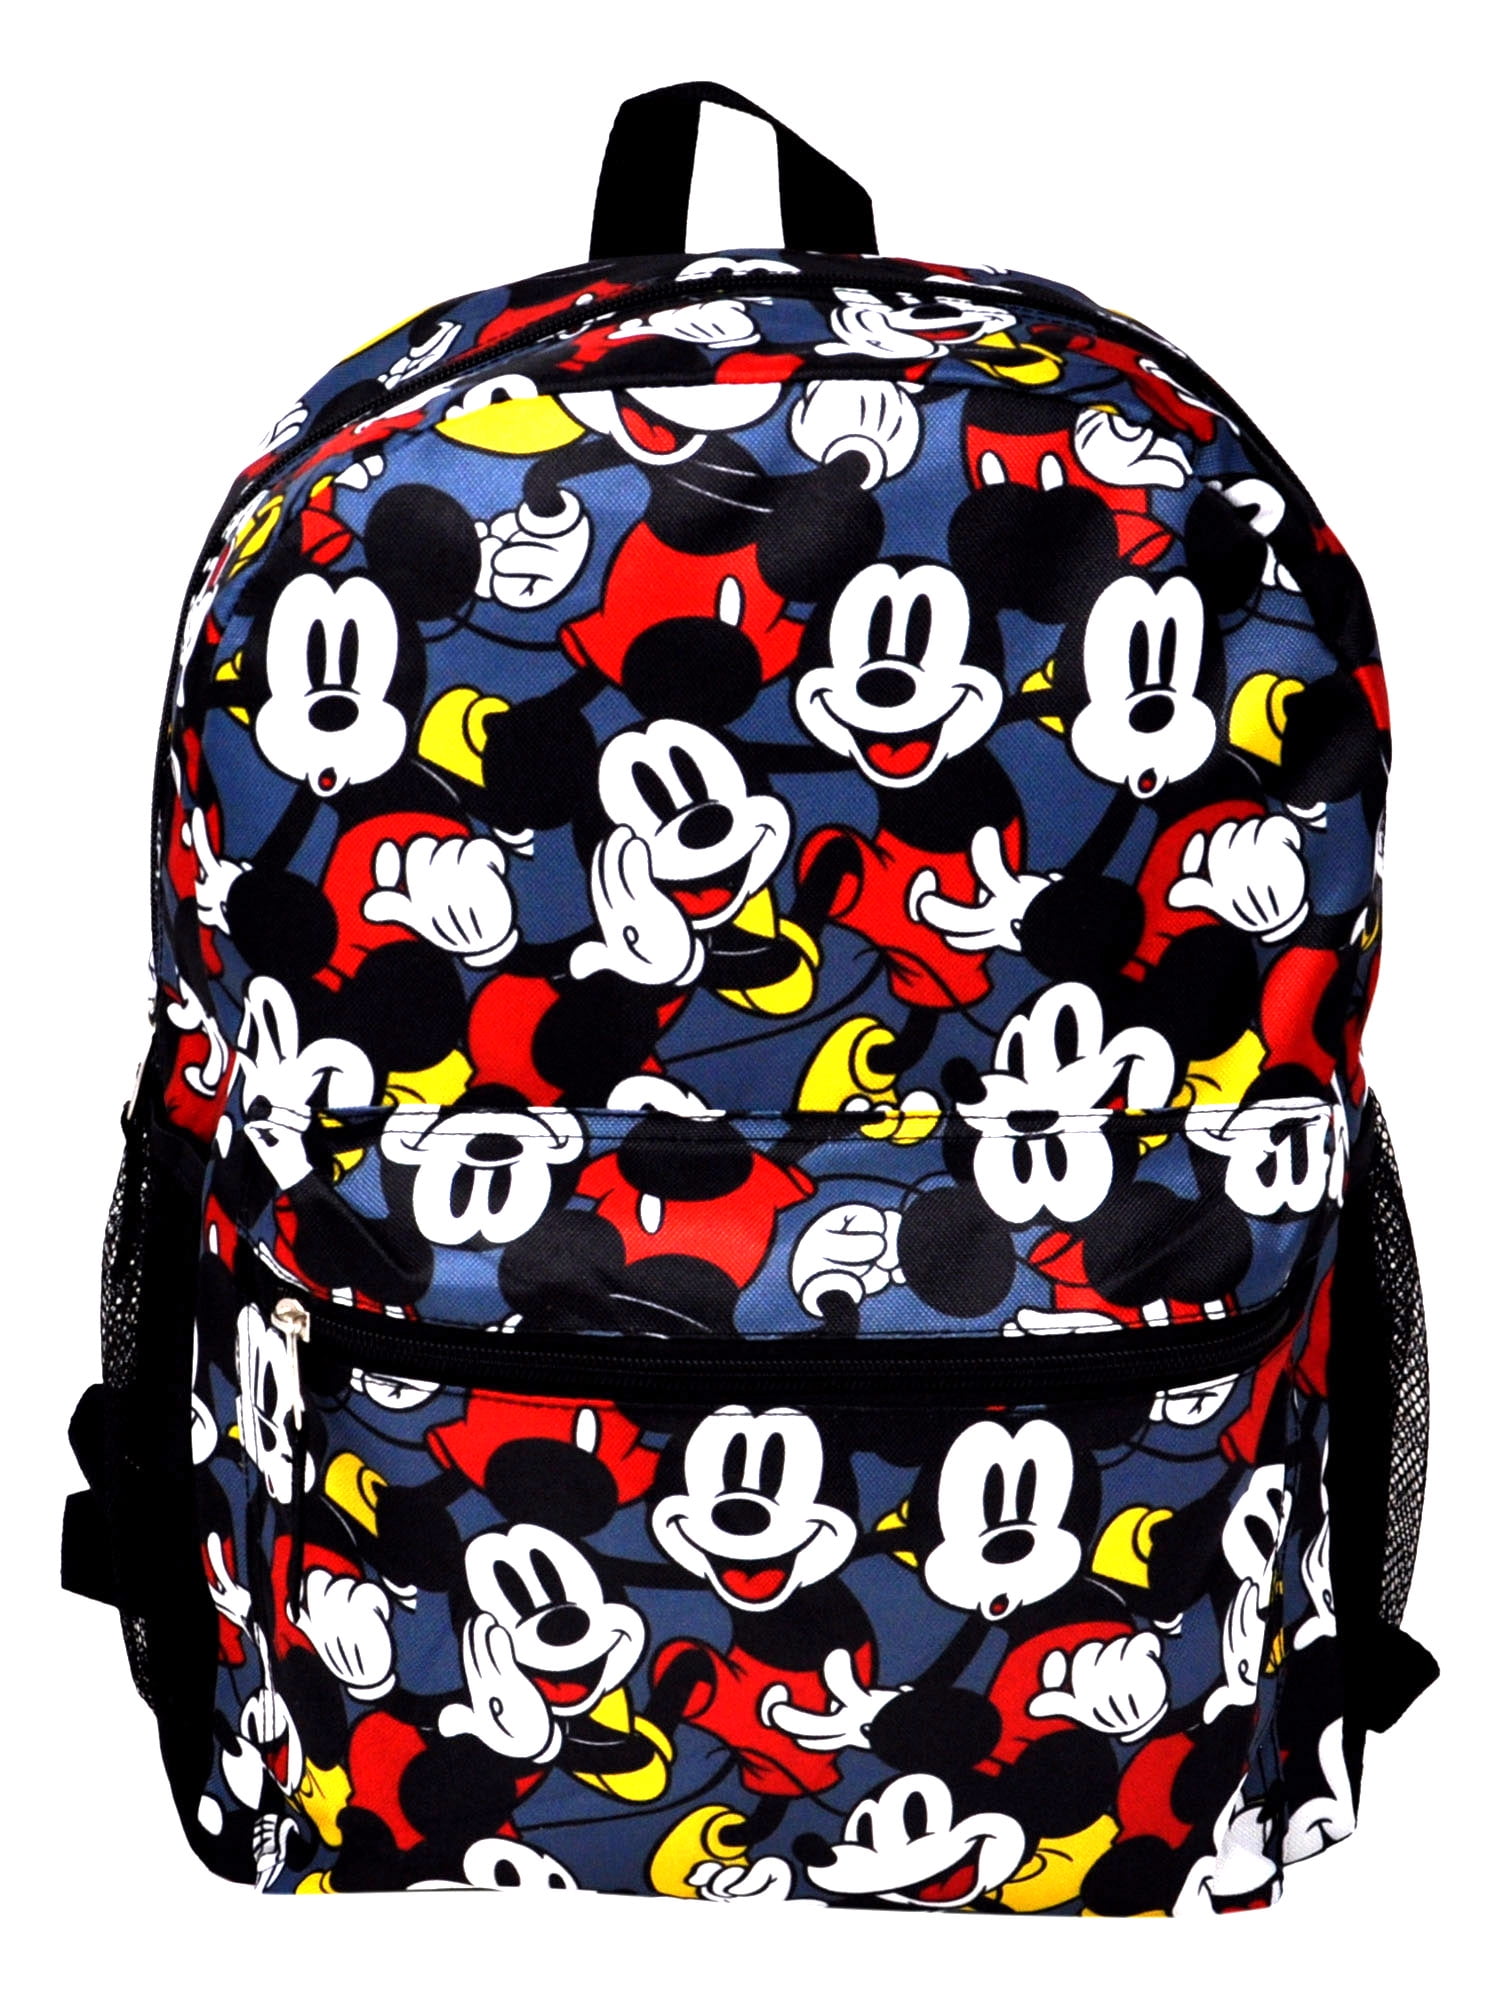 Disney Adult Zippered Backpack Mickey Mouse Bag with 2 Carrying Handle 17'' 